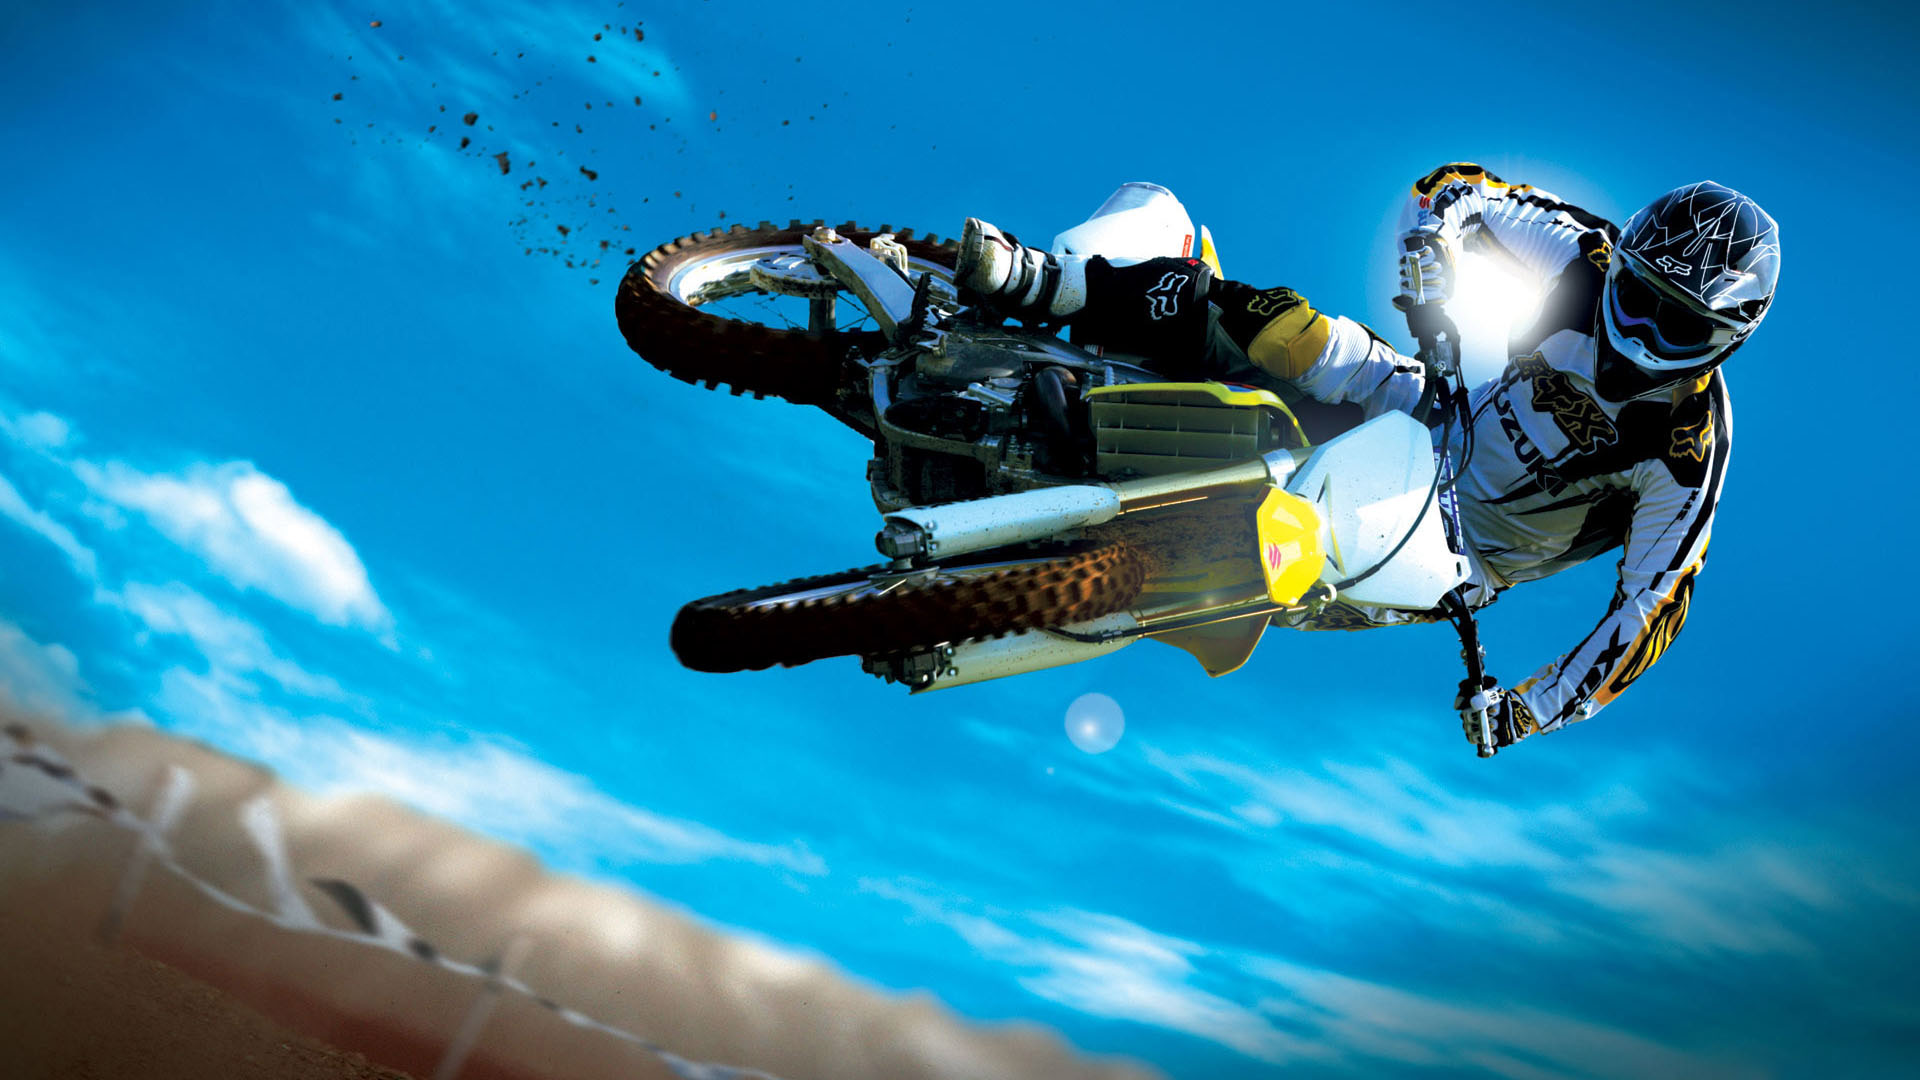 Dirt Bike Jump Awesome Wallpaper 9to5 Car Wallpapers